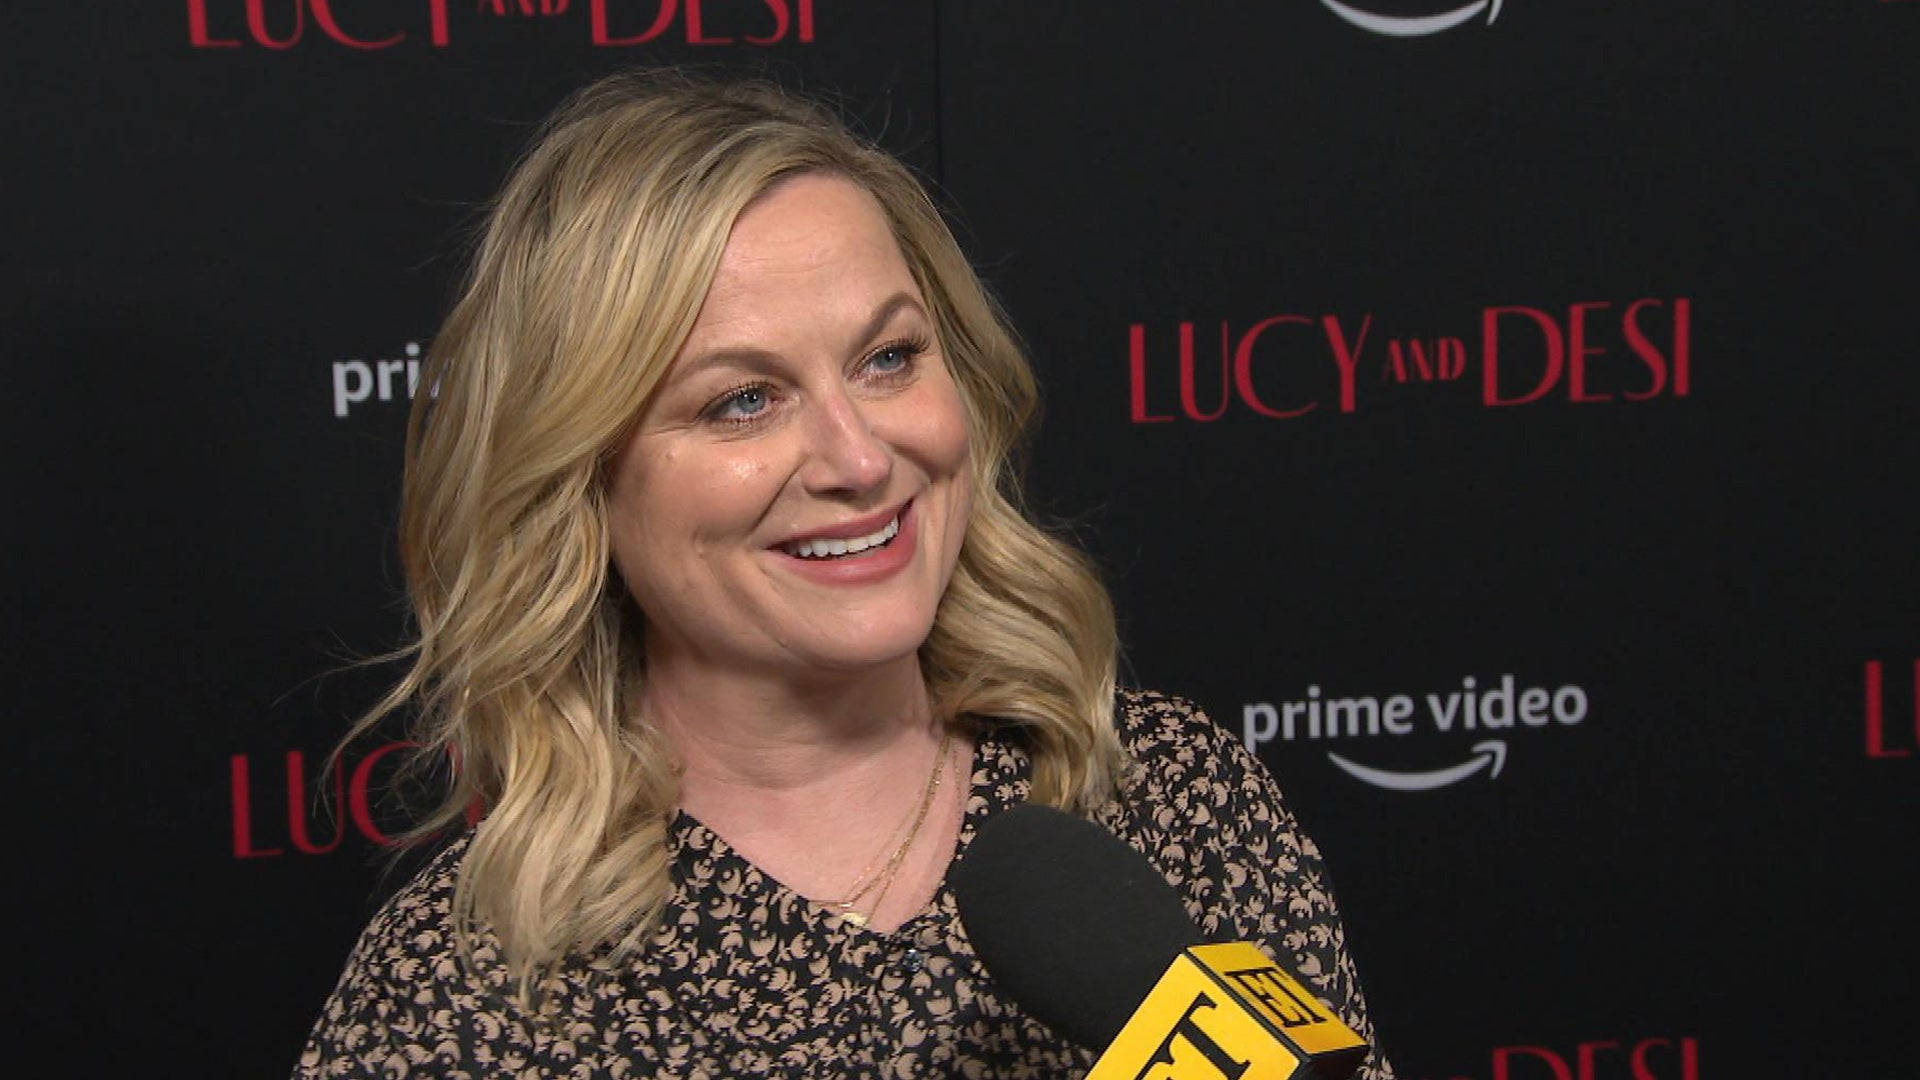 Amypoehler In The Premiere Of Lucy And Desi. Sfondo